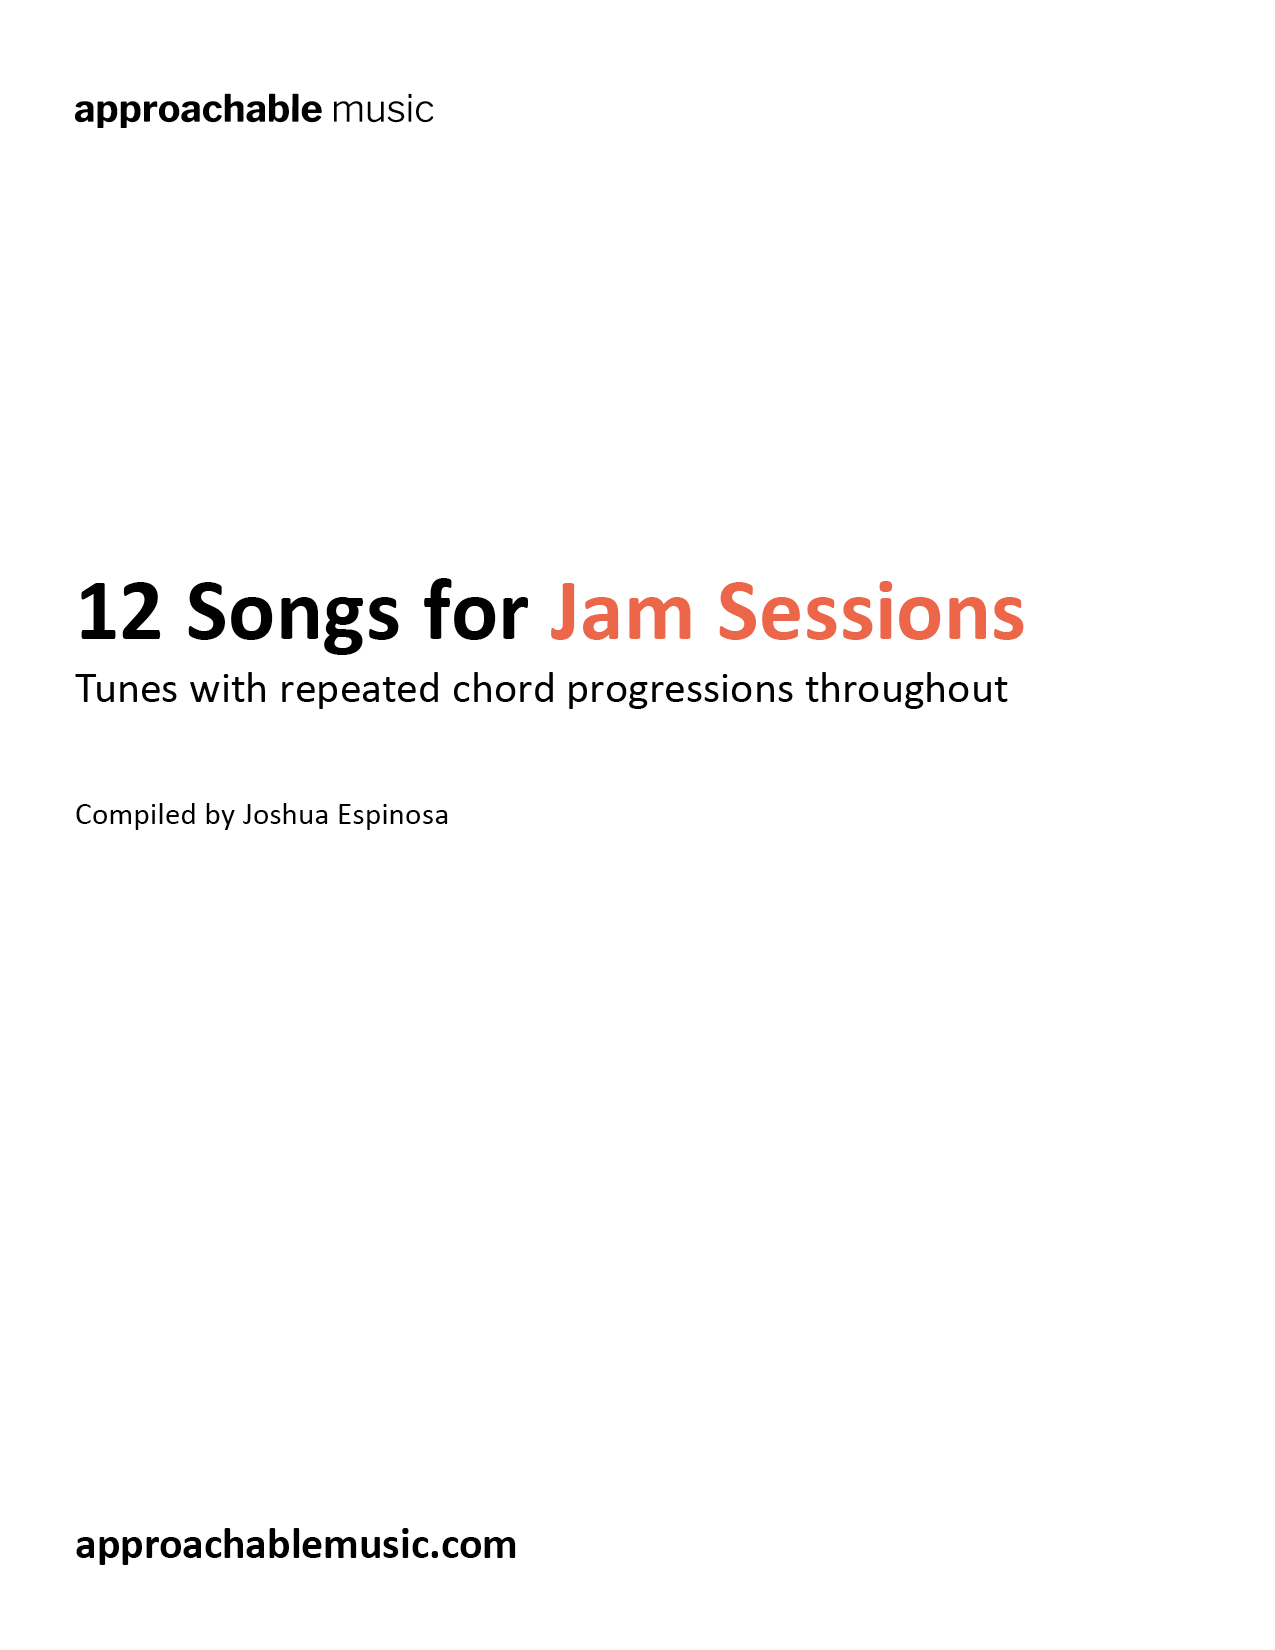 jam session songs preview 1